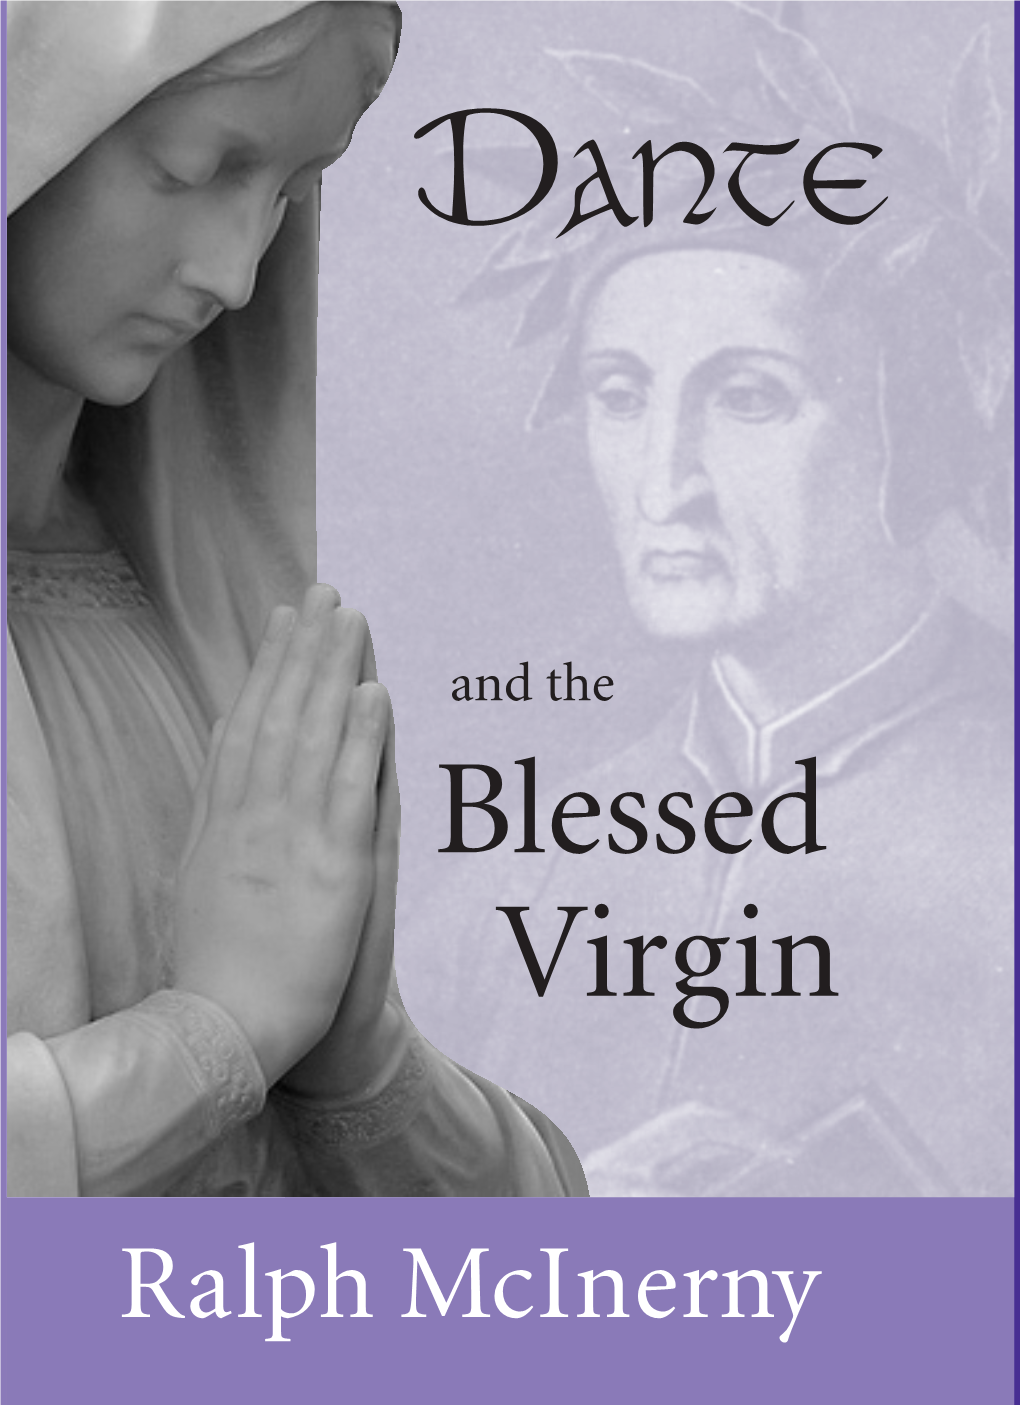 Dante and the Blessed Virgin